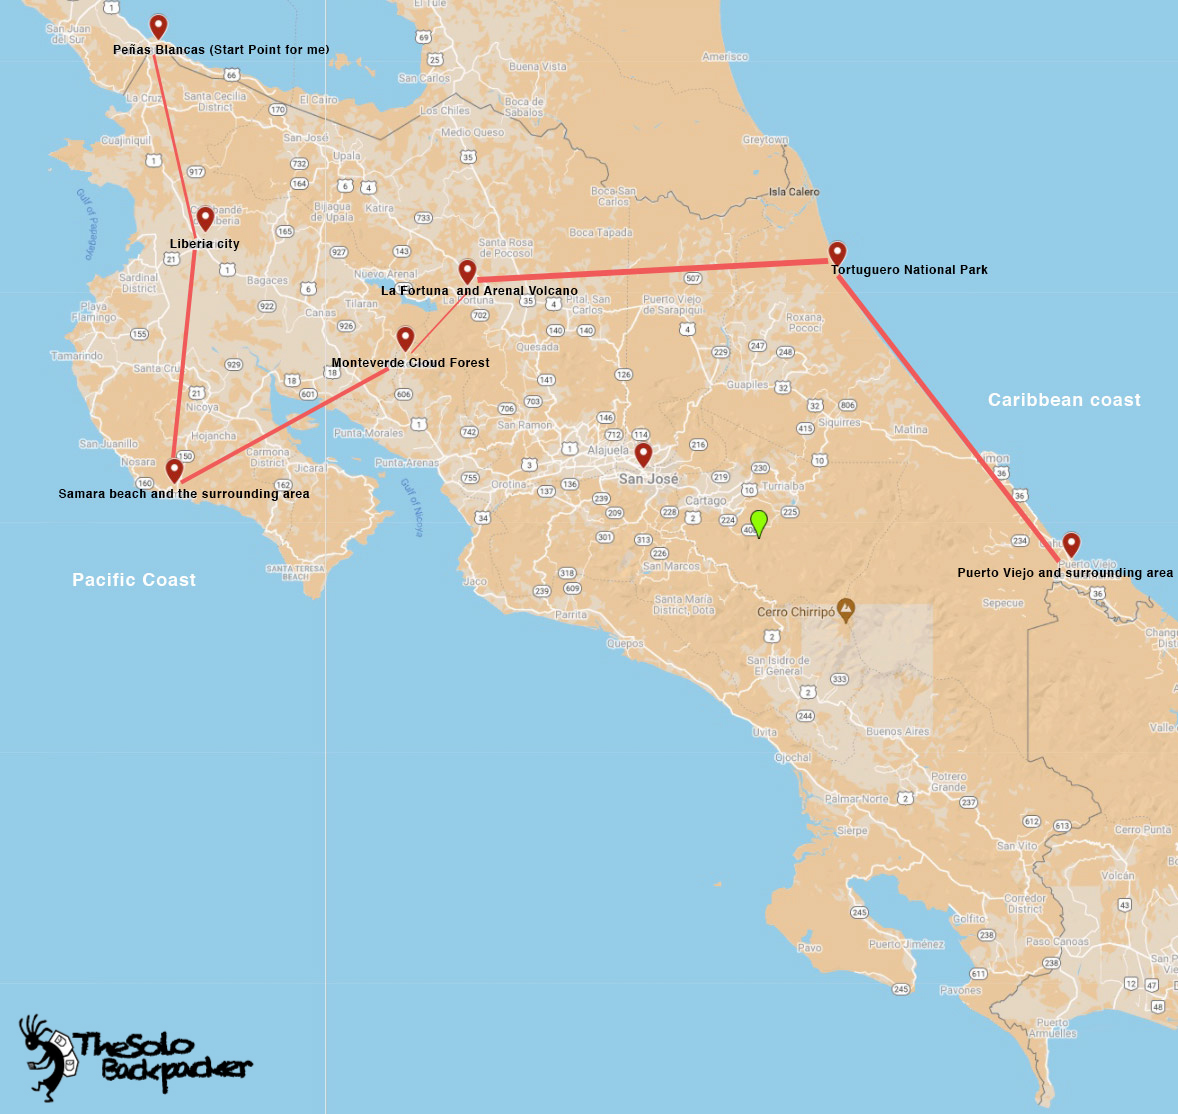 Costa-Rica-Costa-rica-Backpacking-Itinerary-Map-TheSoloBackpacker